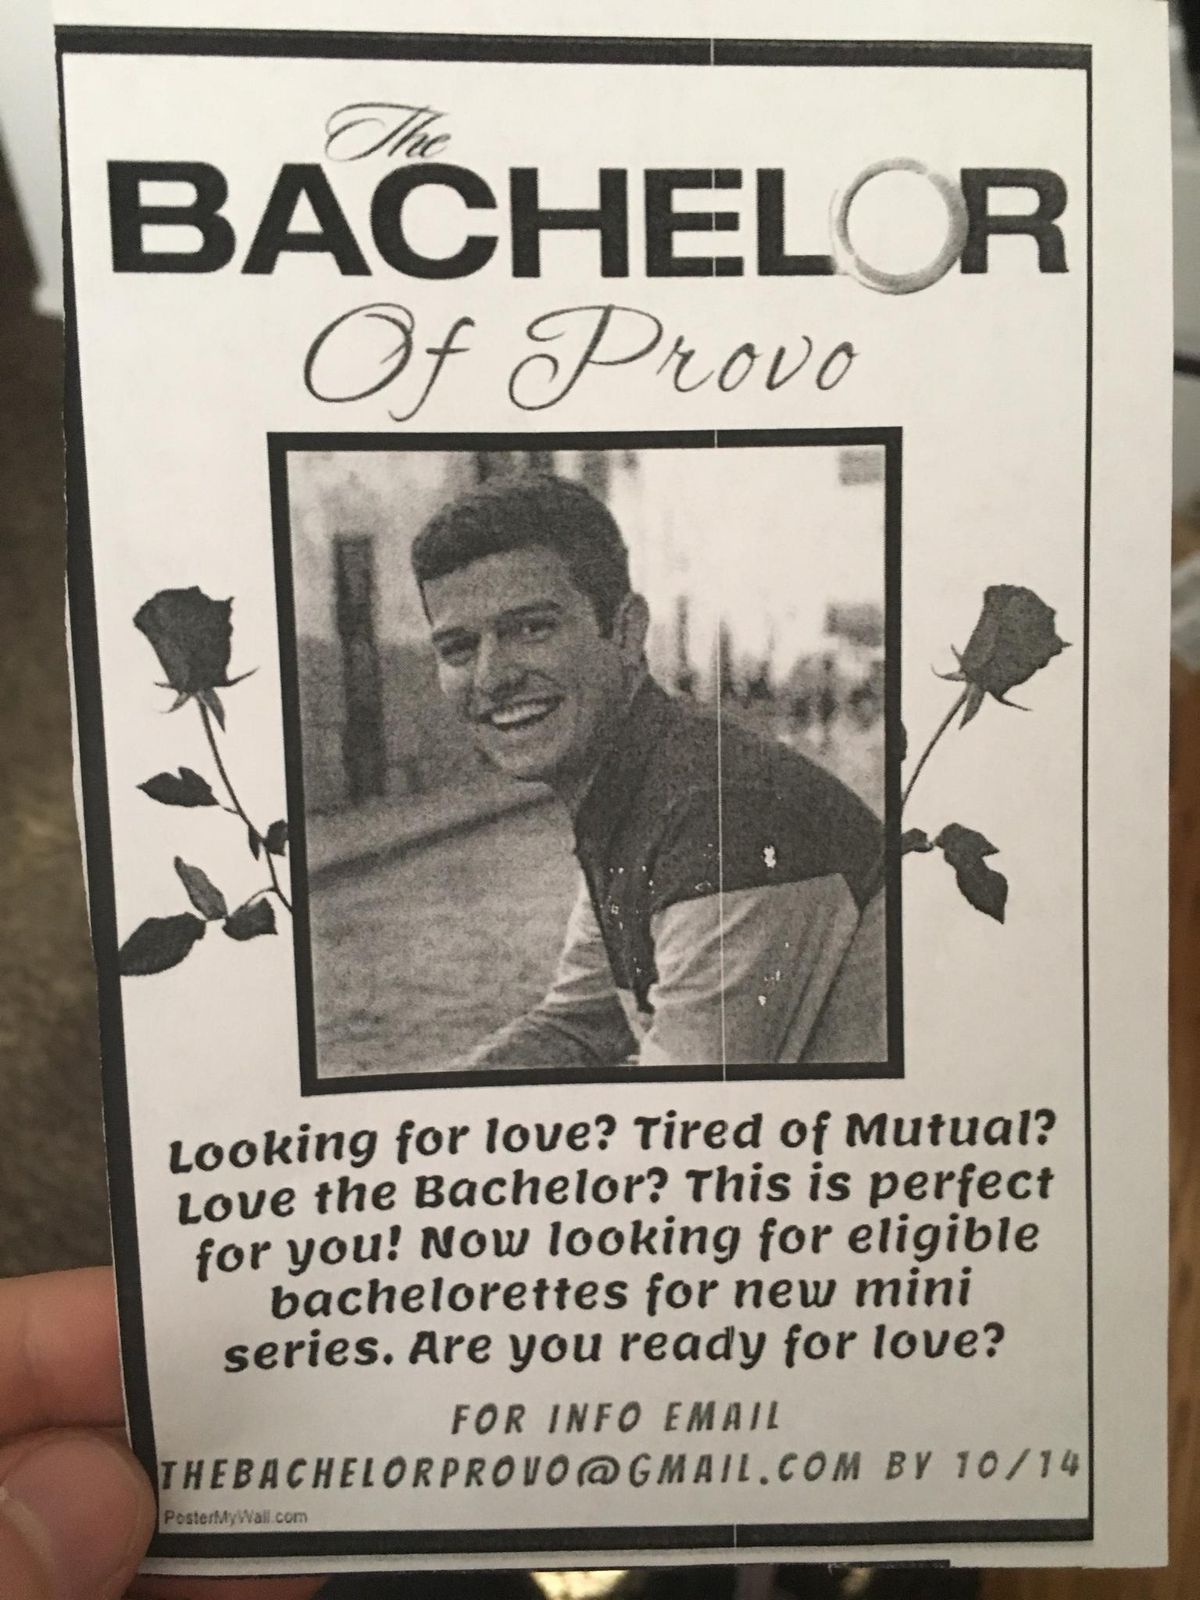 The flyer Remington Butler created and handed out on campus to get applicants for "The Bachelor of Provo."